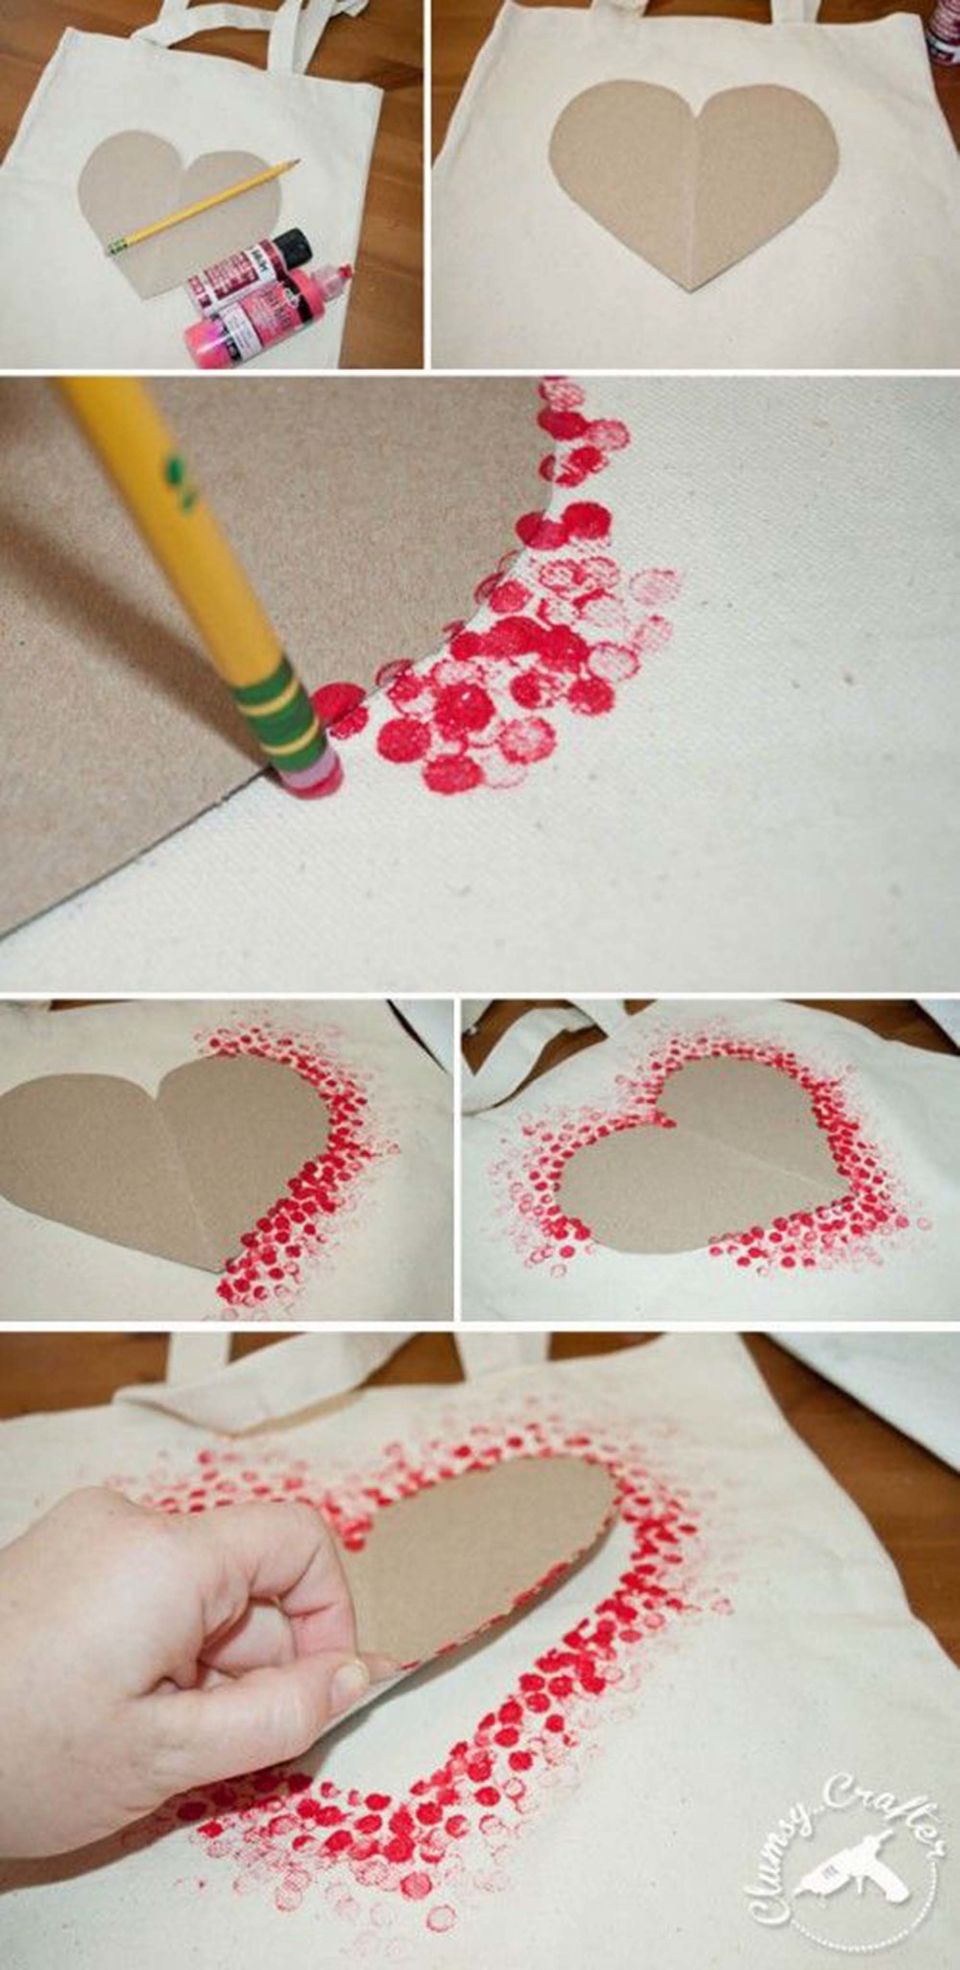 23 Easy Valentine S Day Crafts That Require No Special Skills Whatsoever Huffpost Life